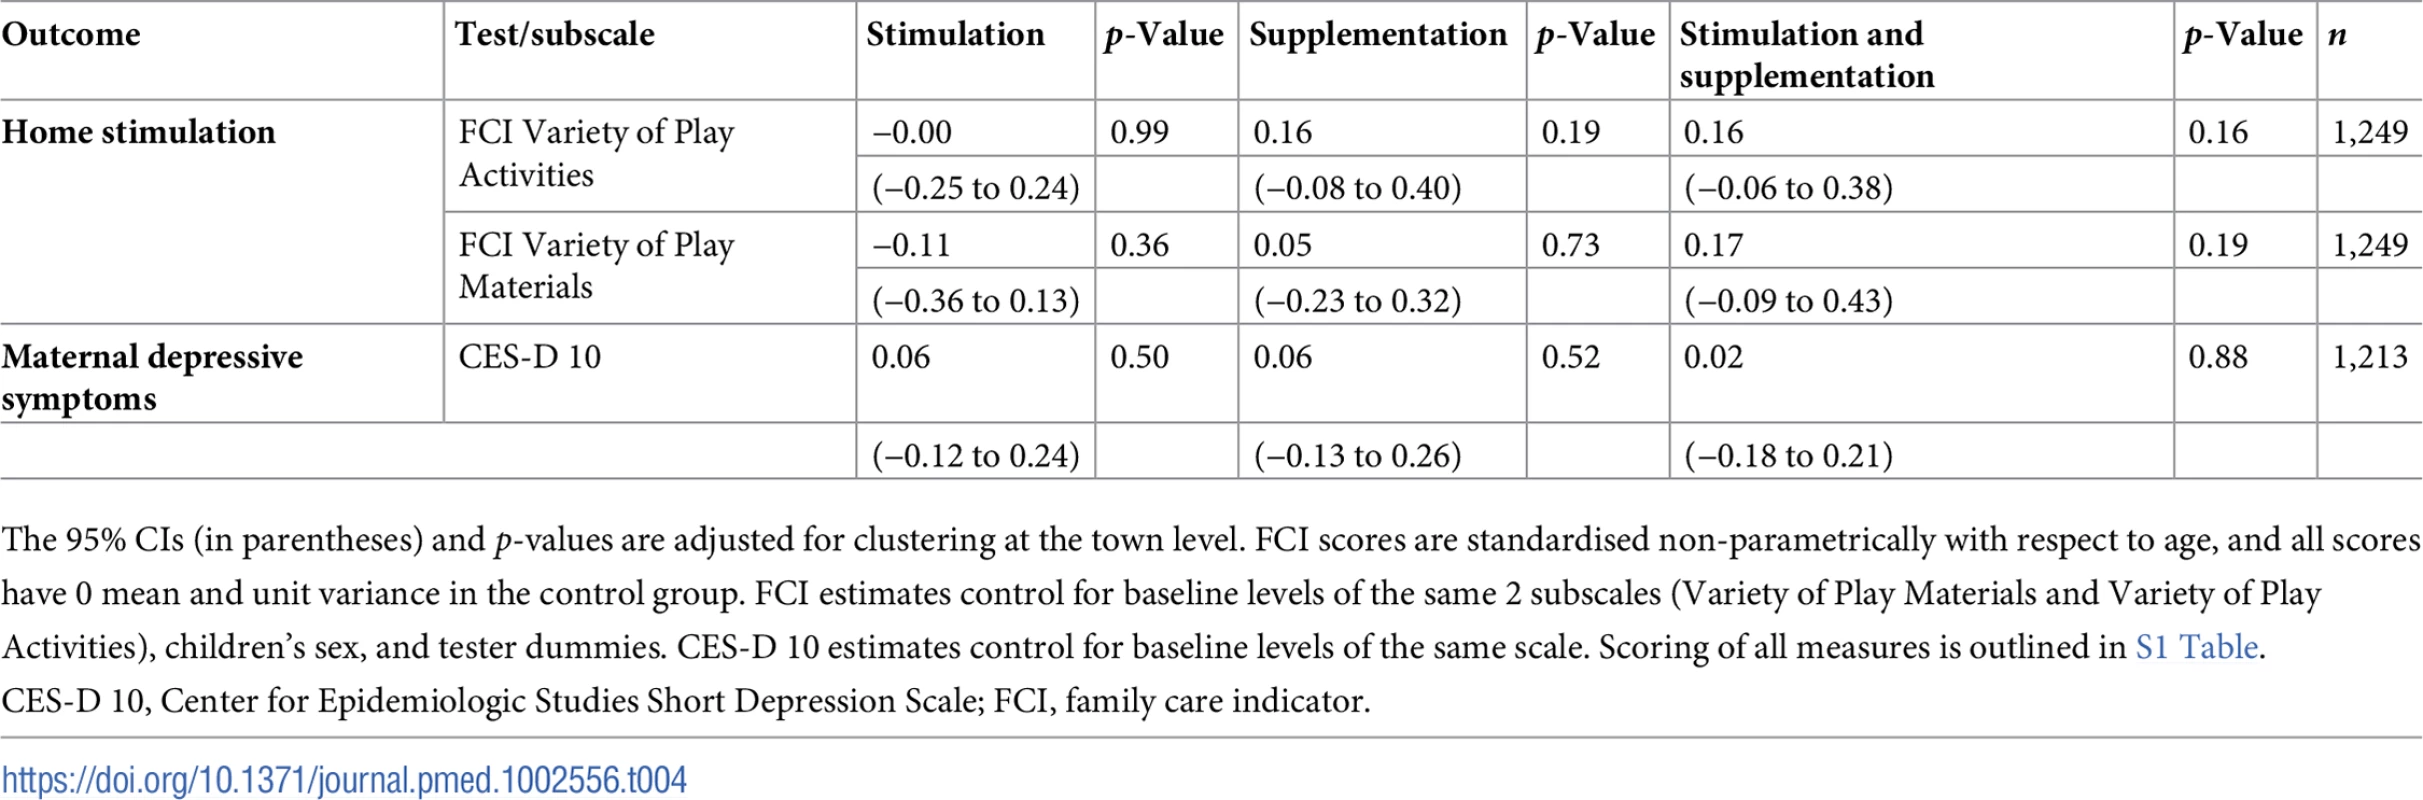 Estimated treatment effects for stimulation in the home environment and maternal depressive symptoms.